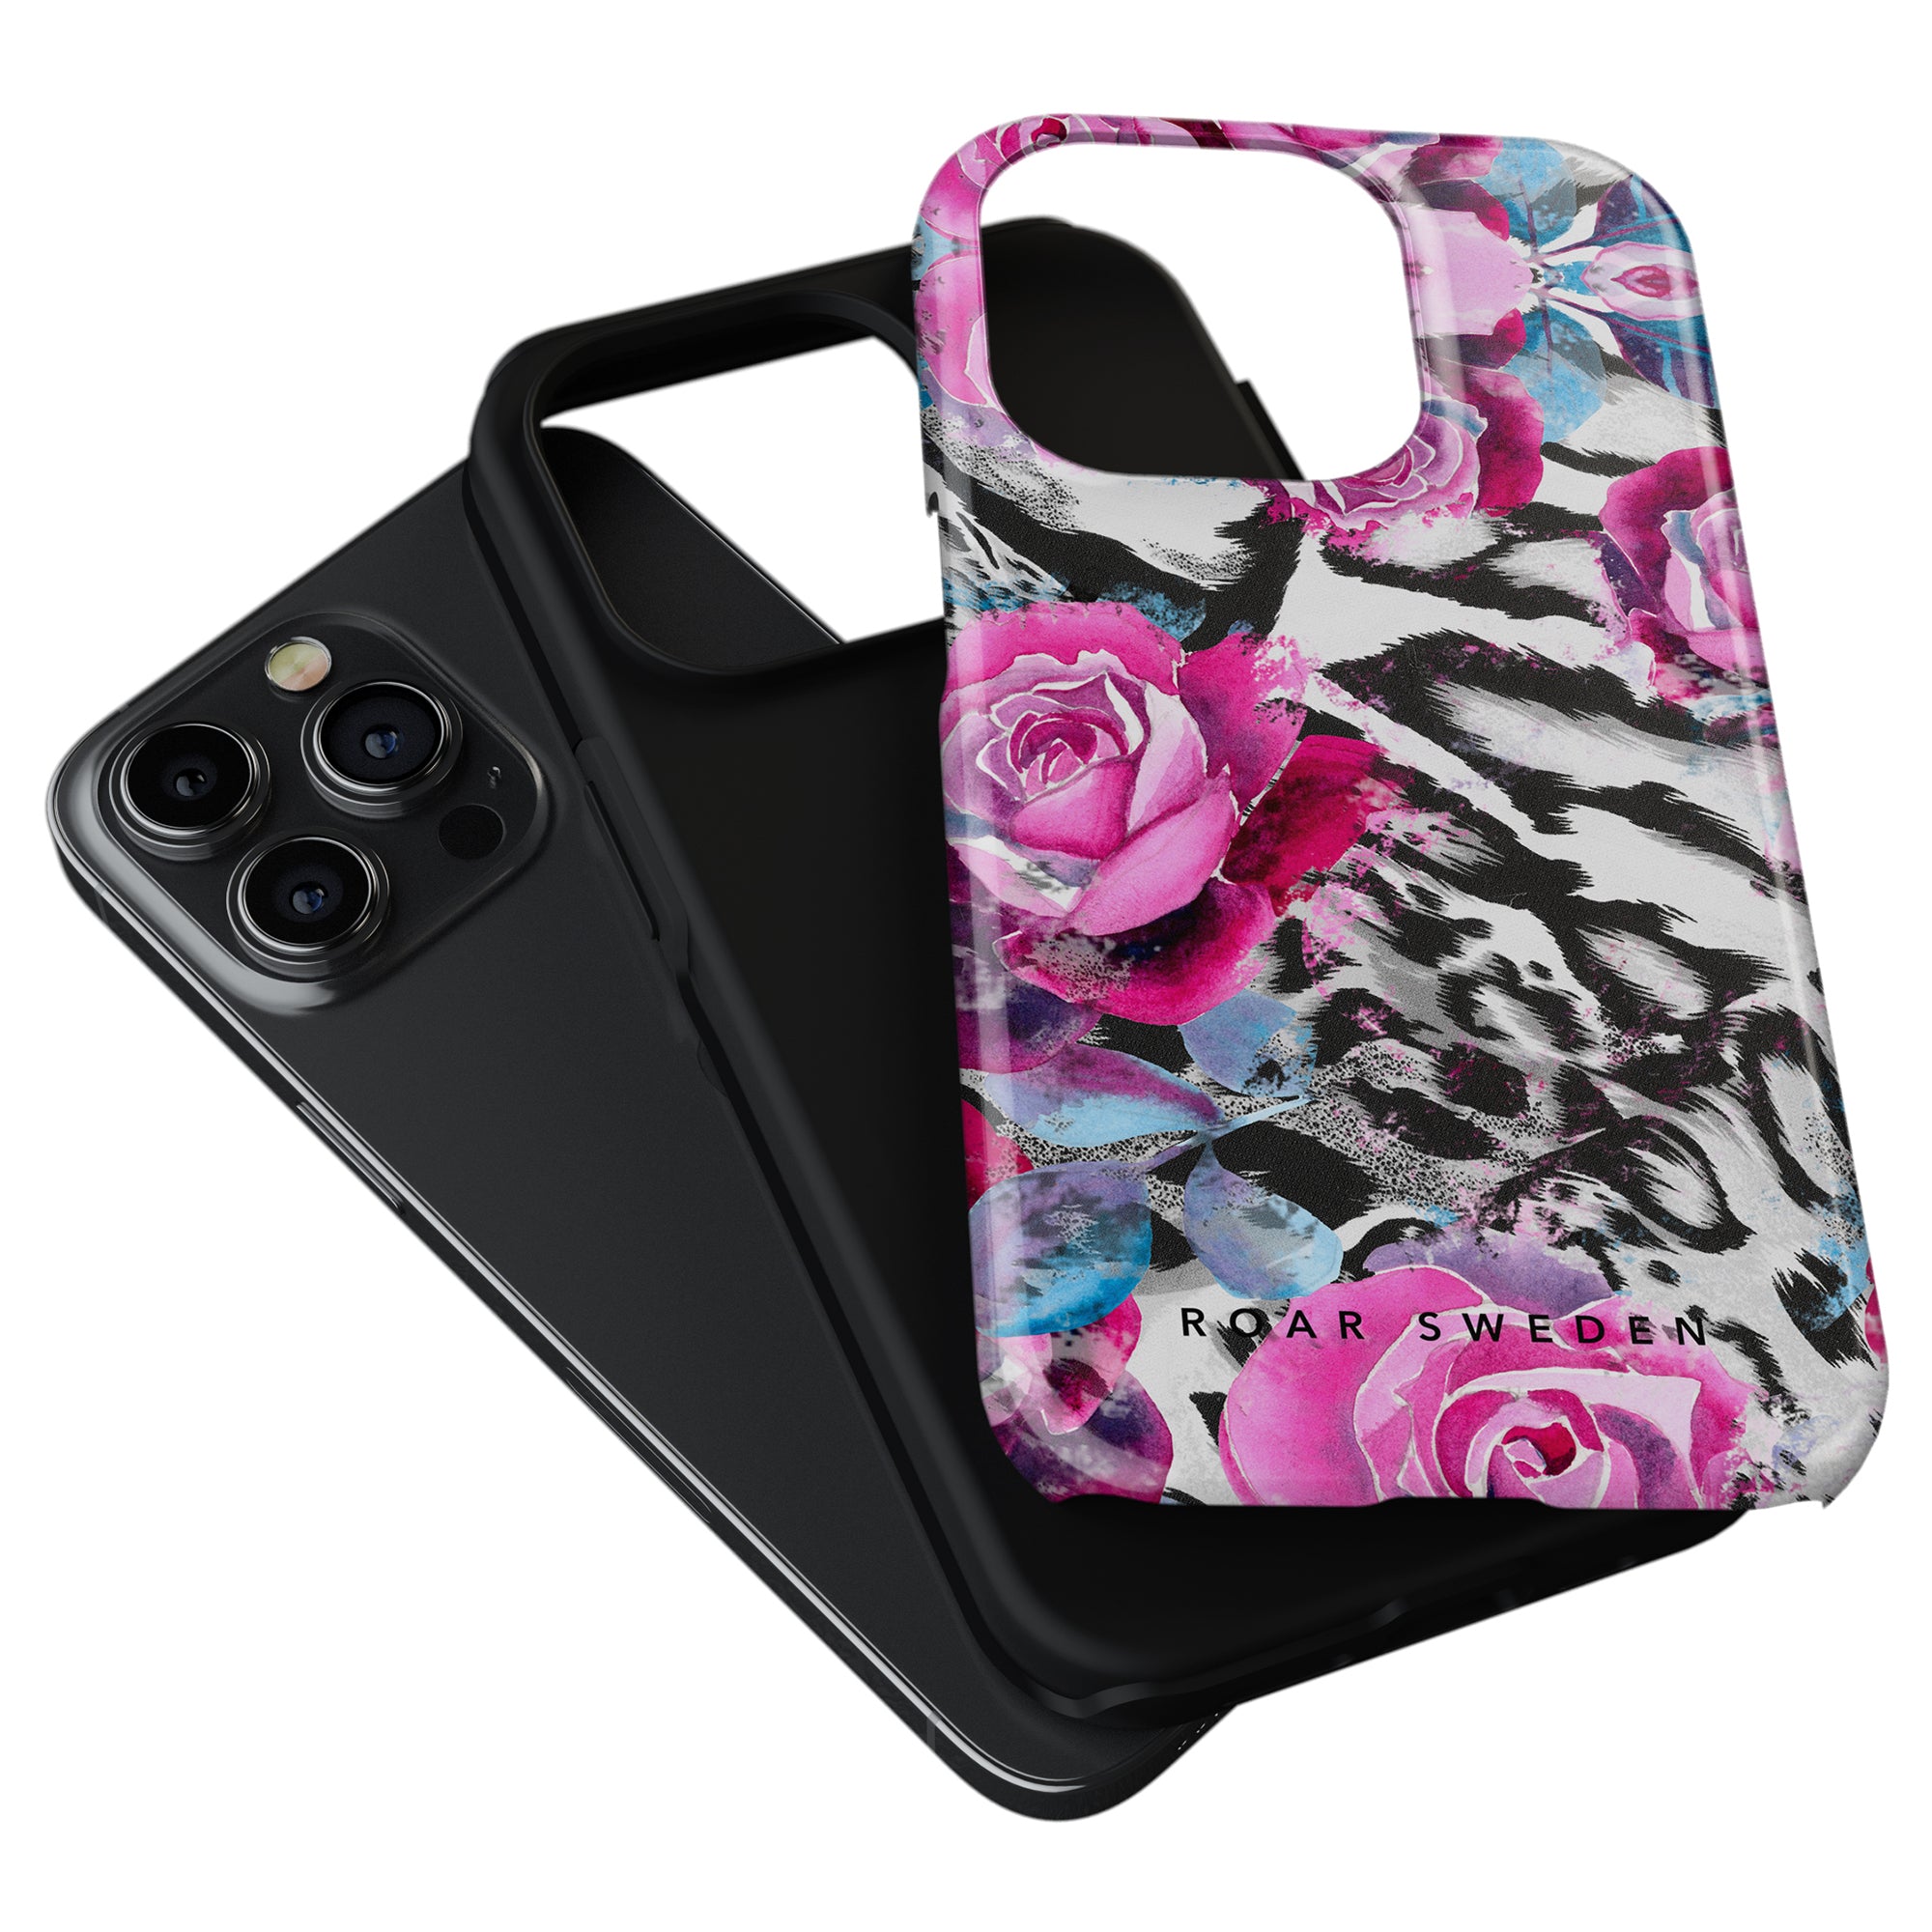 Two smartphone cases; one black and the other with a Rosy Wildcat - Tough Case design labeled "roar sweden," both next to an iPhone with triple cameras.